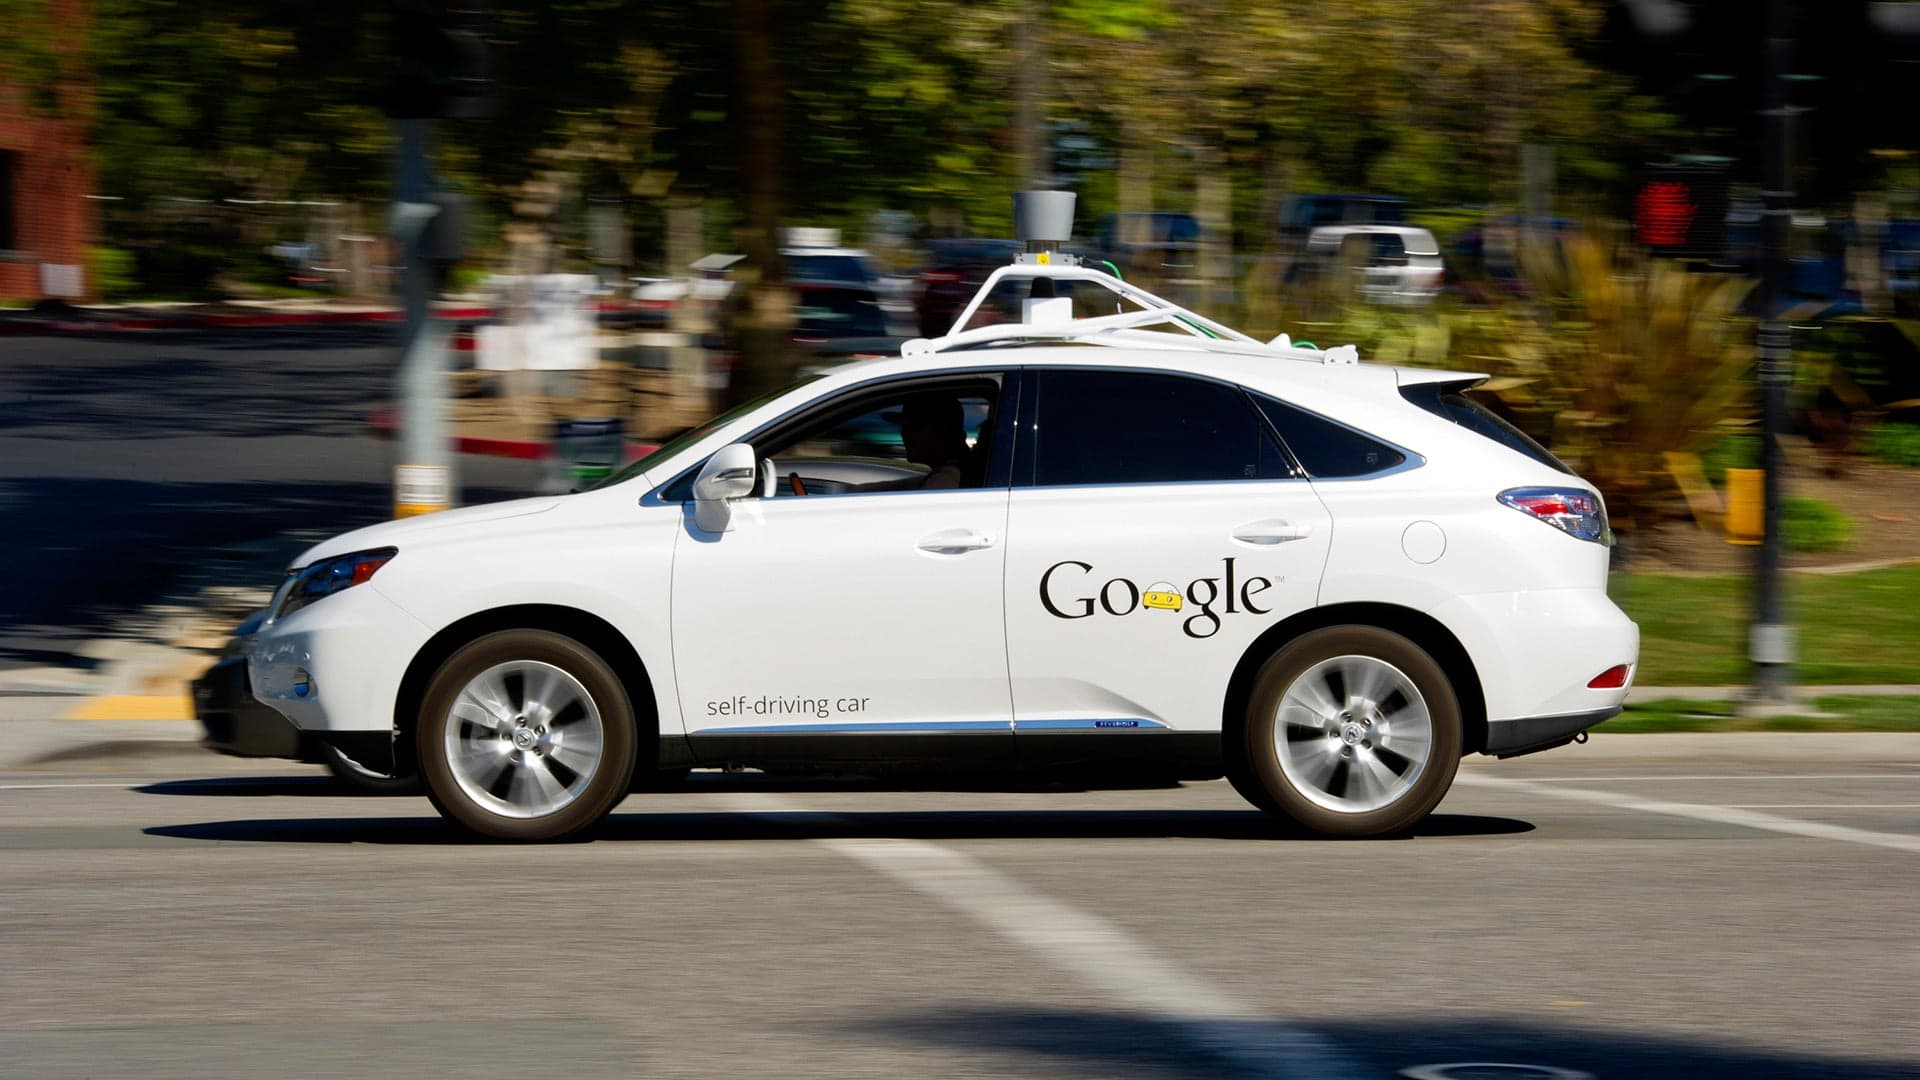 We Don’t Really Know How Much Safer Self-Driving Cars Will Be